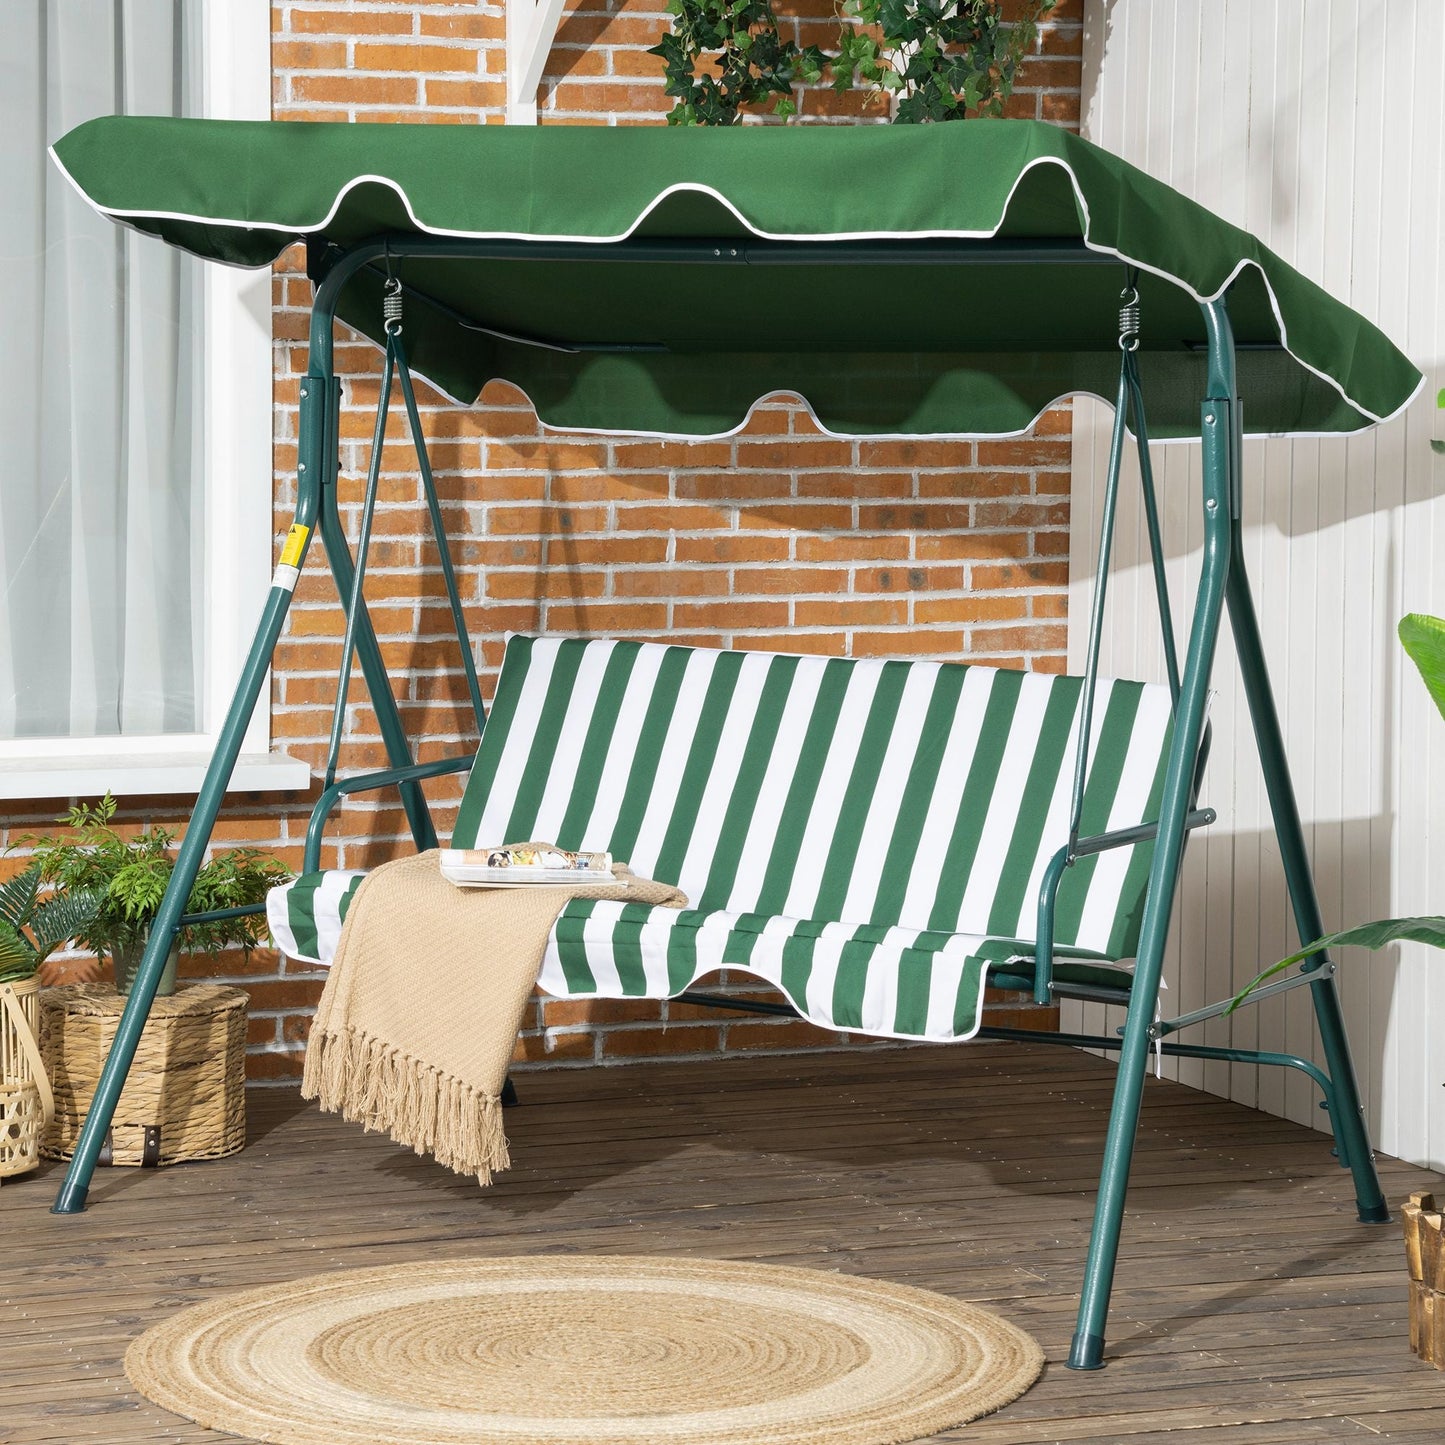 3-Seater Outdoor Porch Swing with Adjustable Canopy, Patio Swing Chair for Garden, Poolside, Backyard, Green and White at Gallery Canada